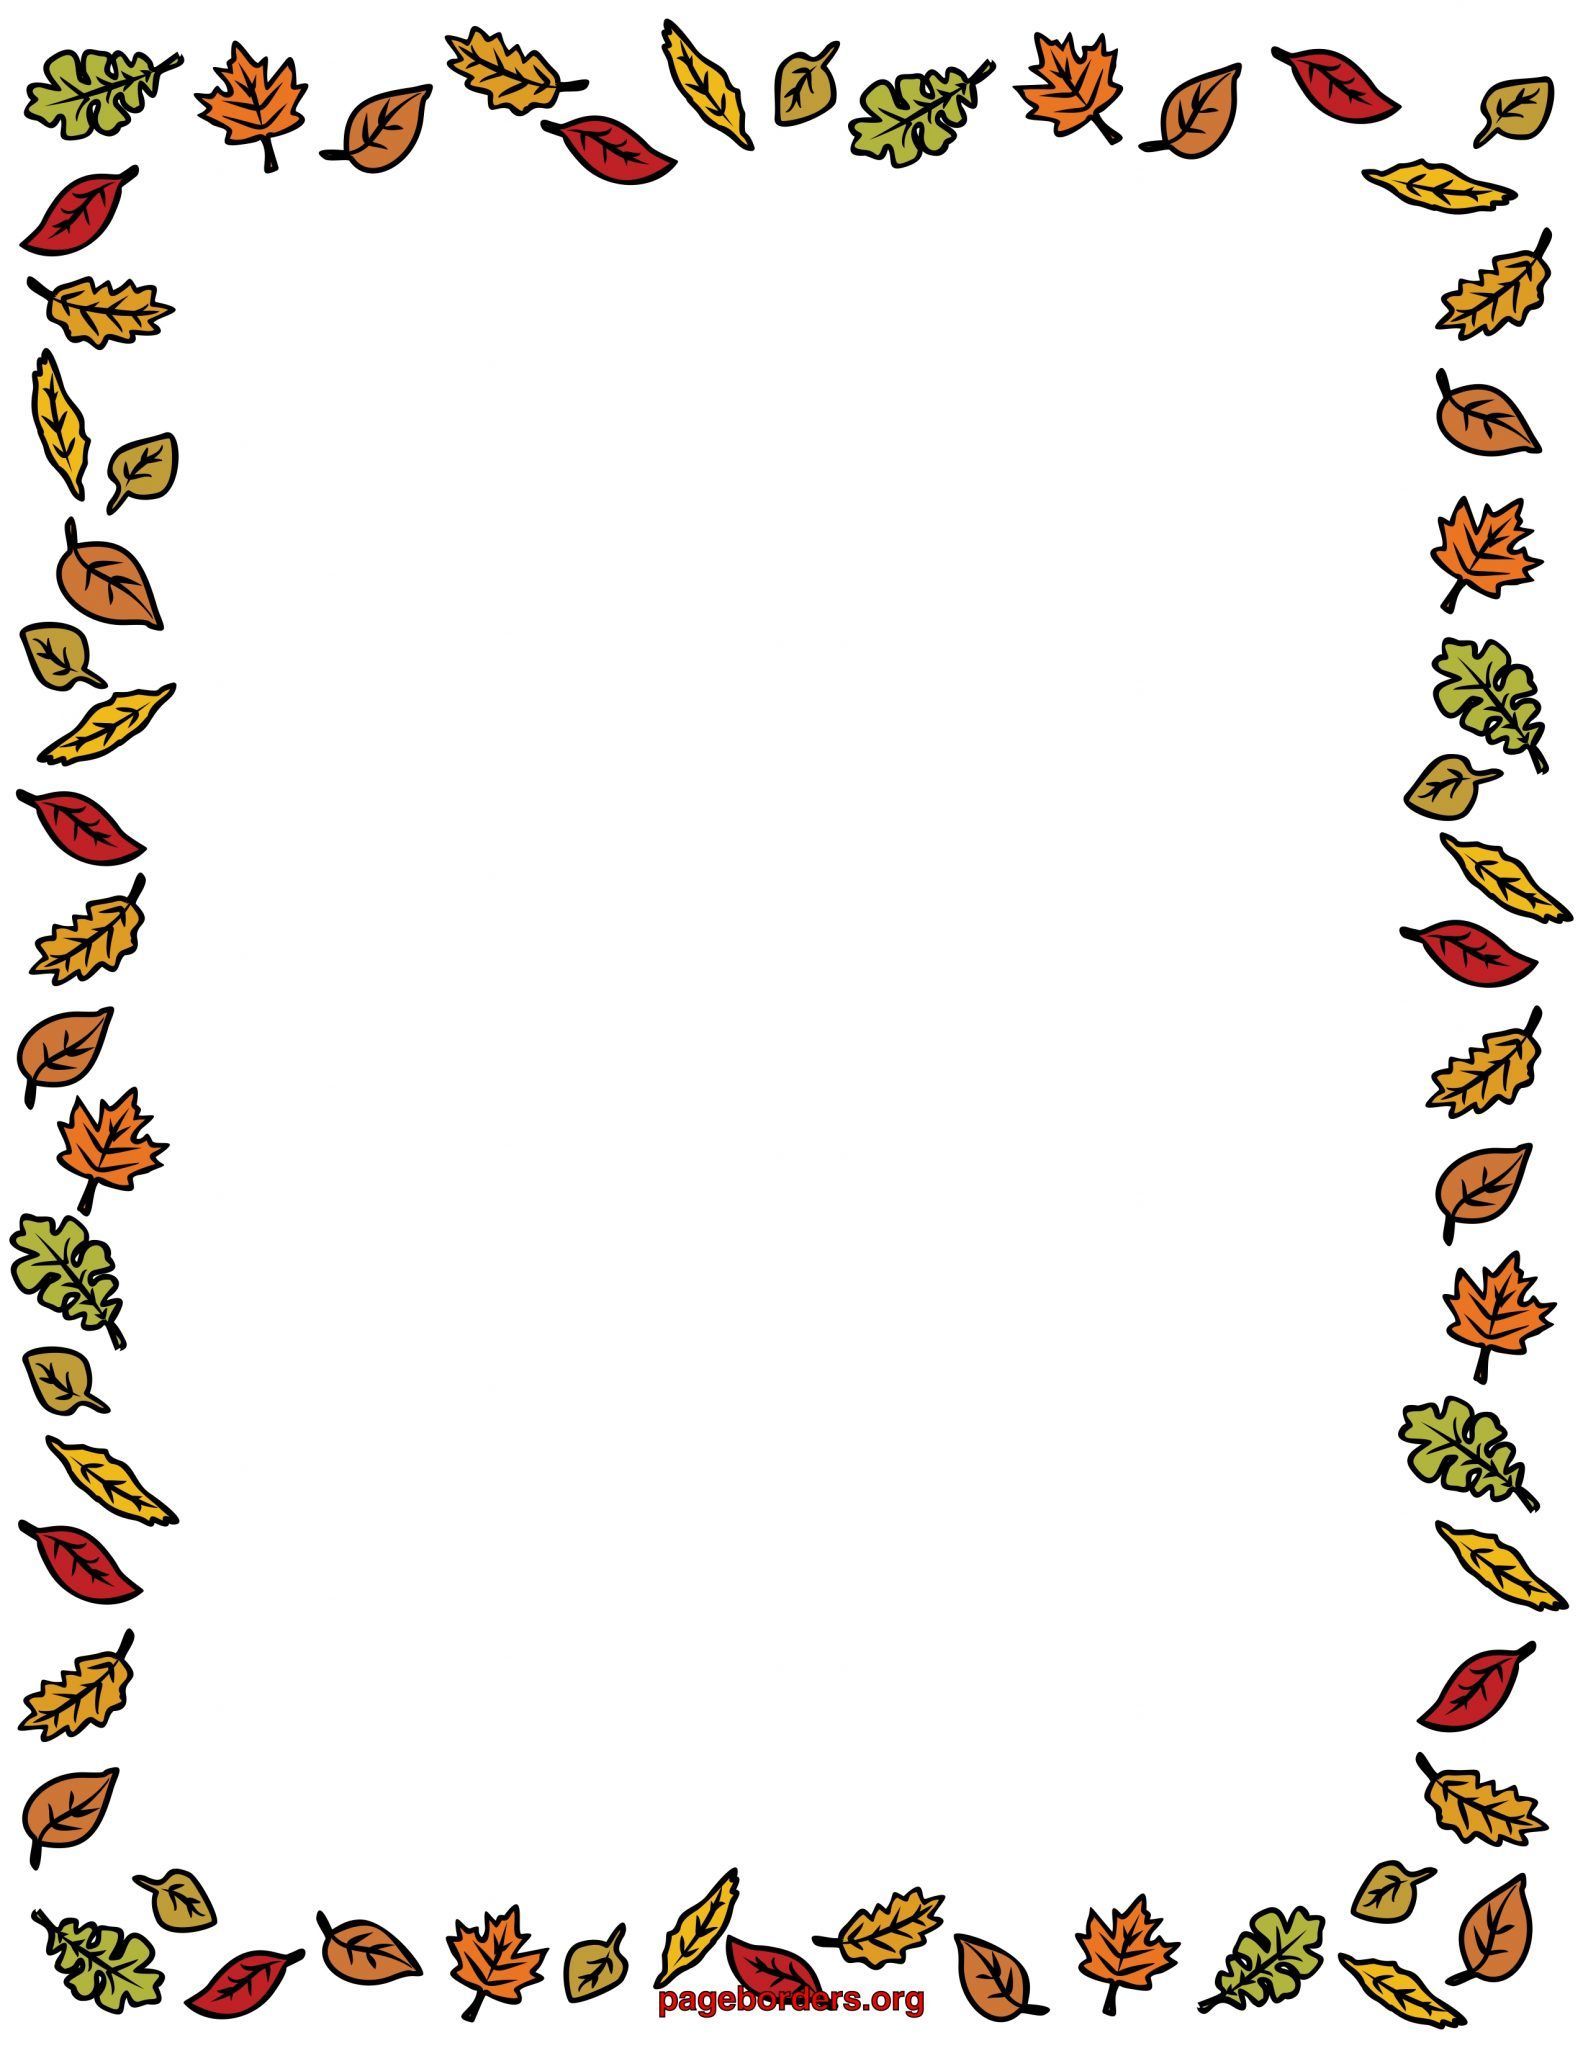 75+ Thanksgiving Turkey Image, Photos, Clipart Pictures Drawings